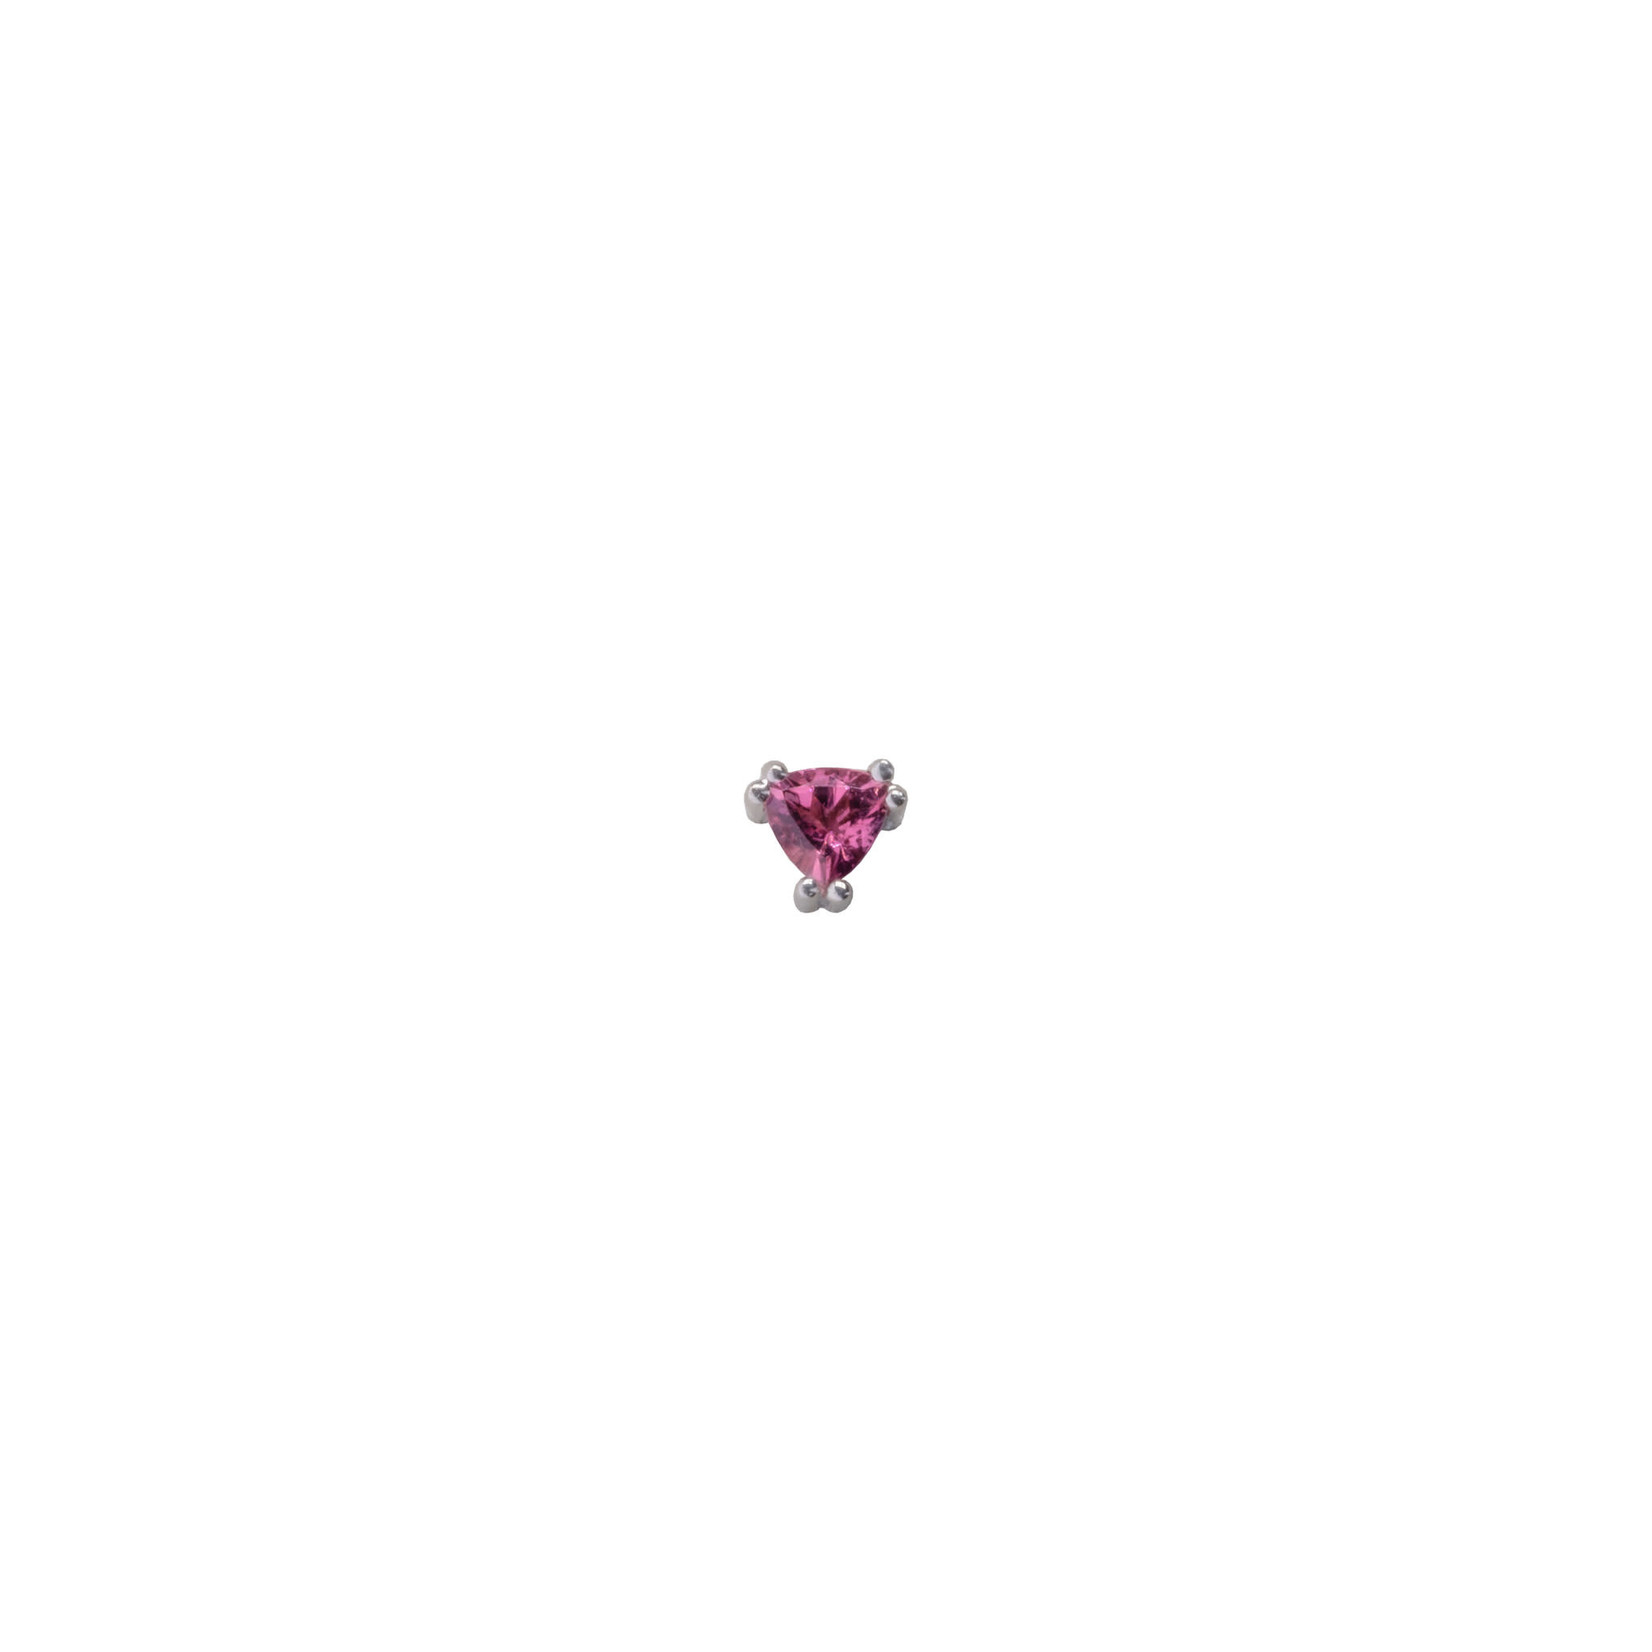 BVLA BVLA white gold "Tanti" double-prong trillion press fit end with 3.0 AA pink tourmaline